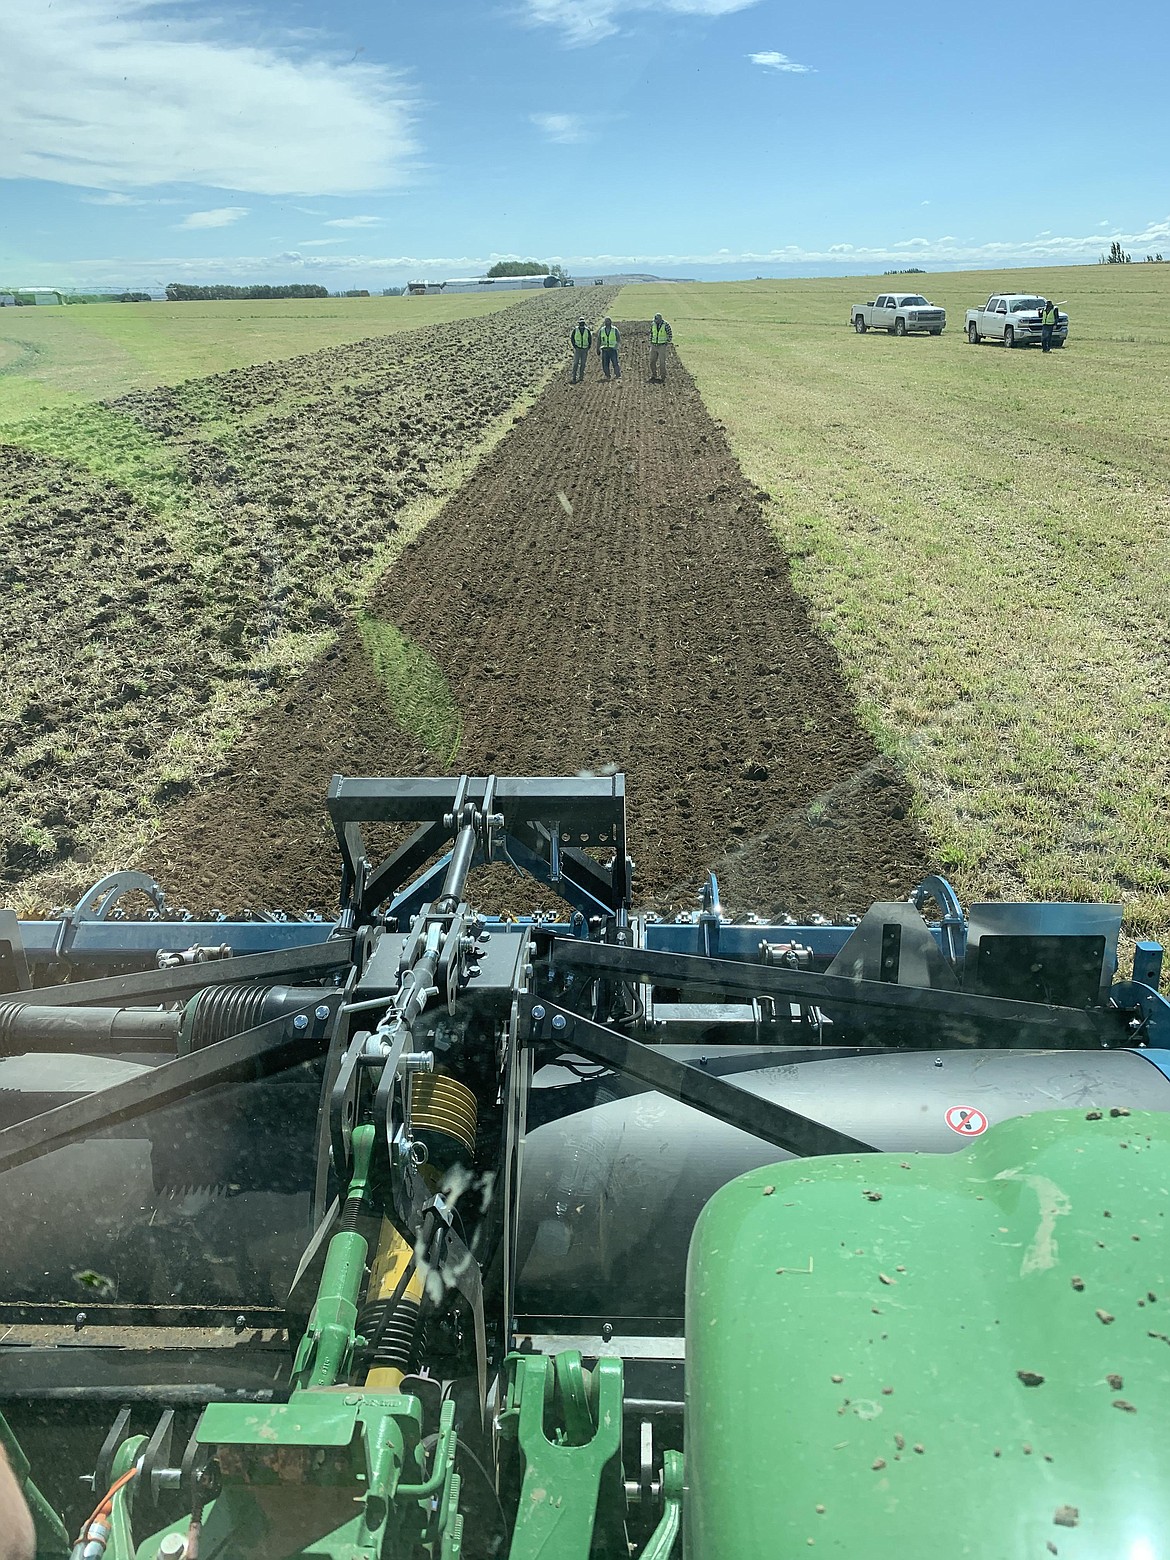 The Imants rotary spader tilled this field near Paterson, Washington in a single pass, accomplishing what would have taken two or three passes for conventional equipment.